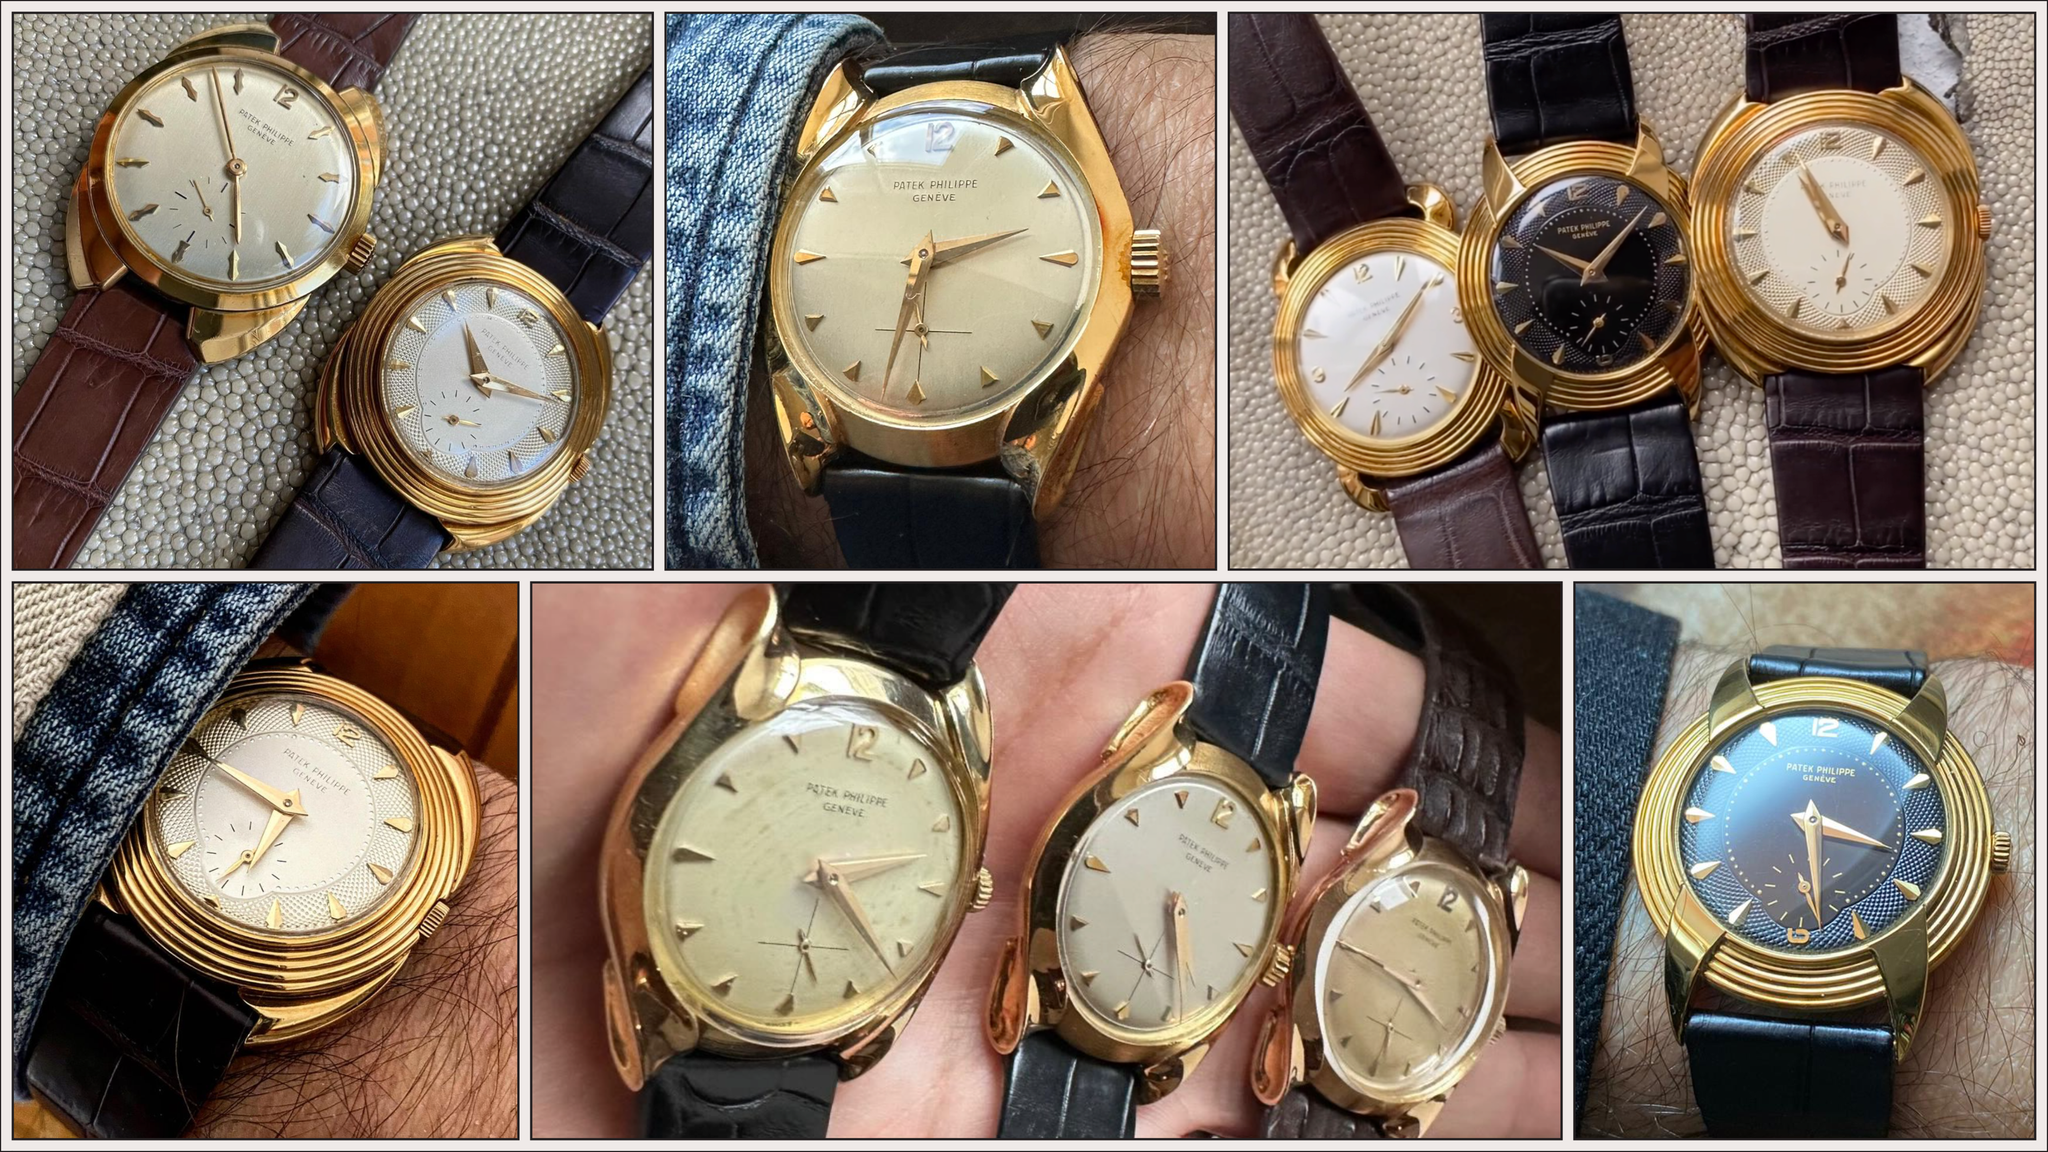 The Roni Madhvani Midsummer Night's Dream Collection of vintage Patek Philippe watches